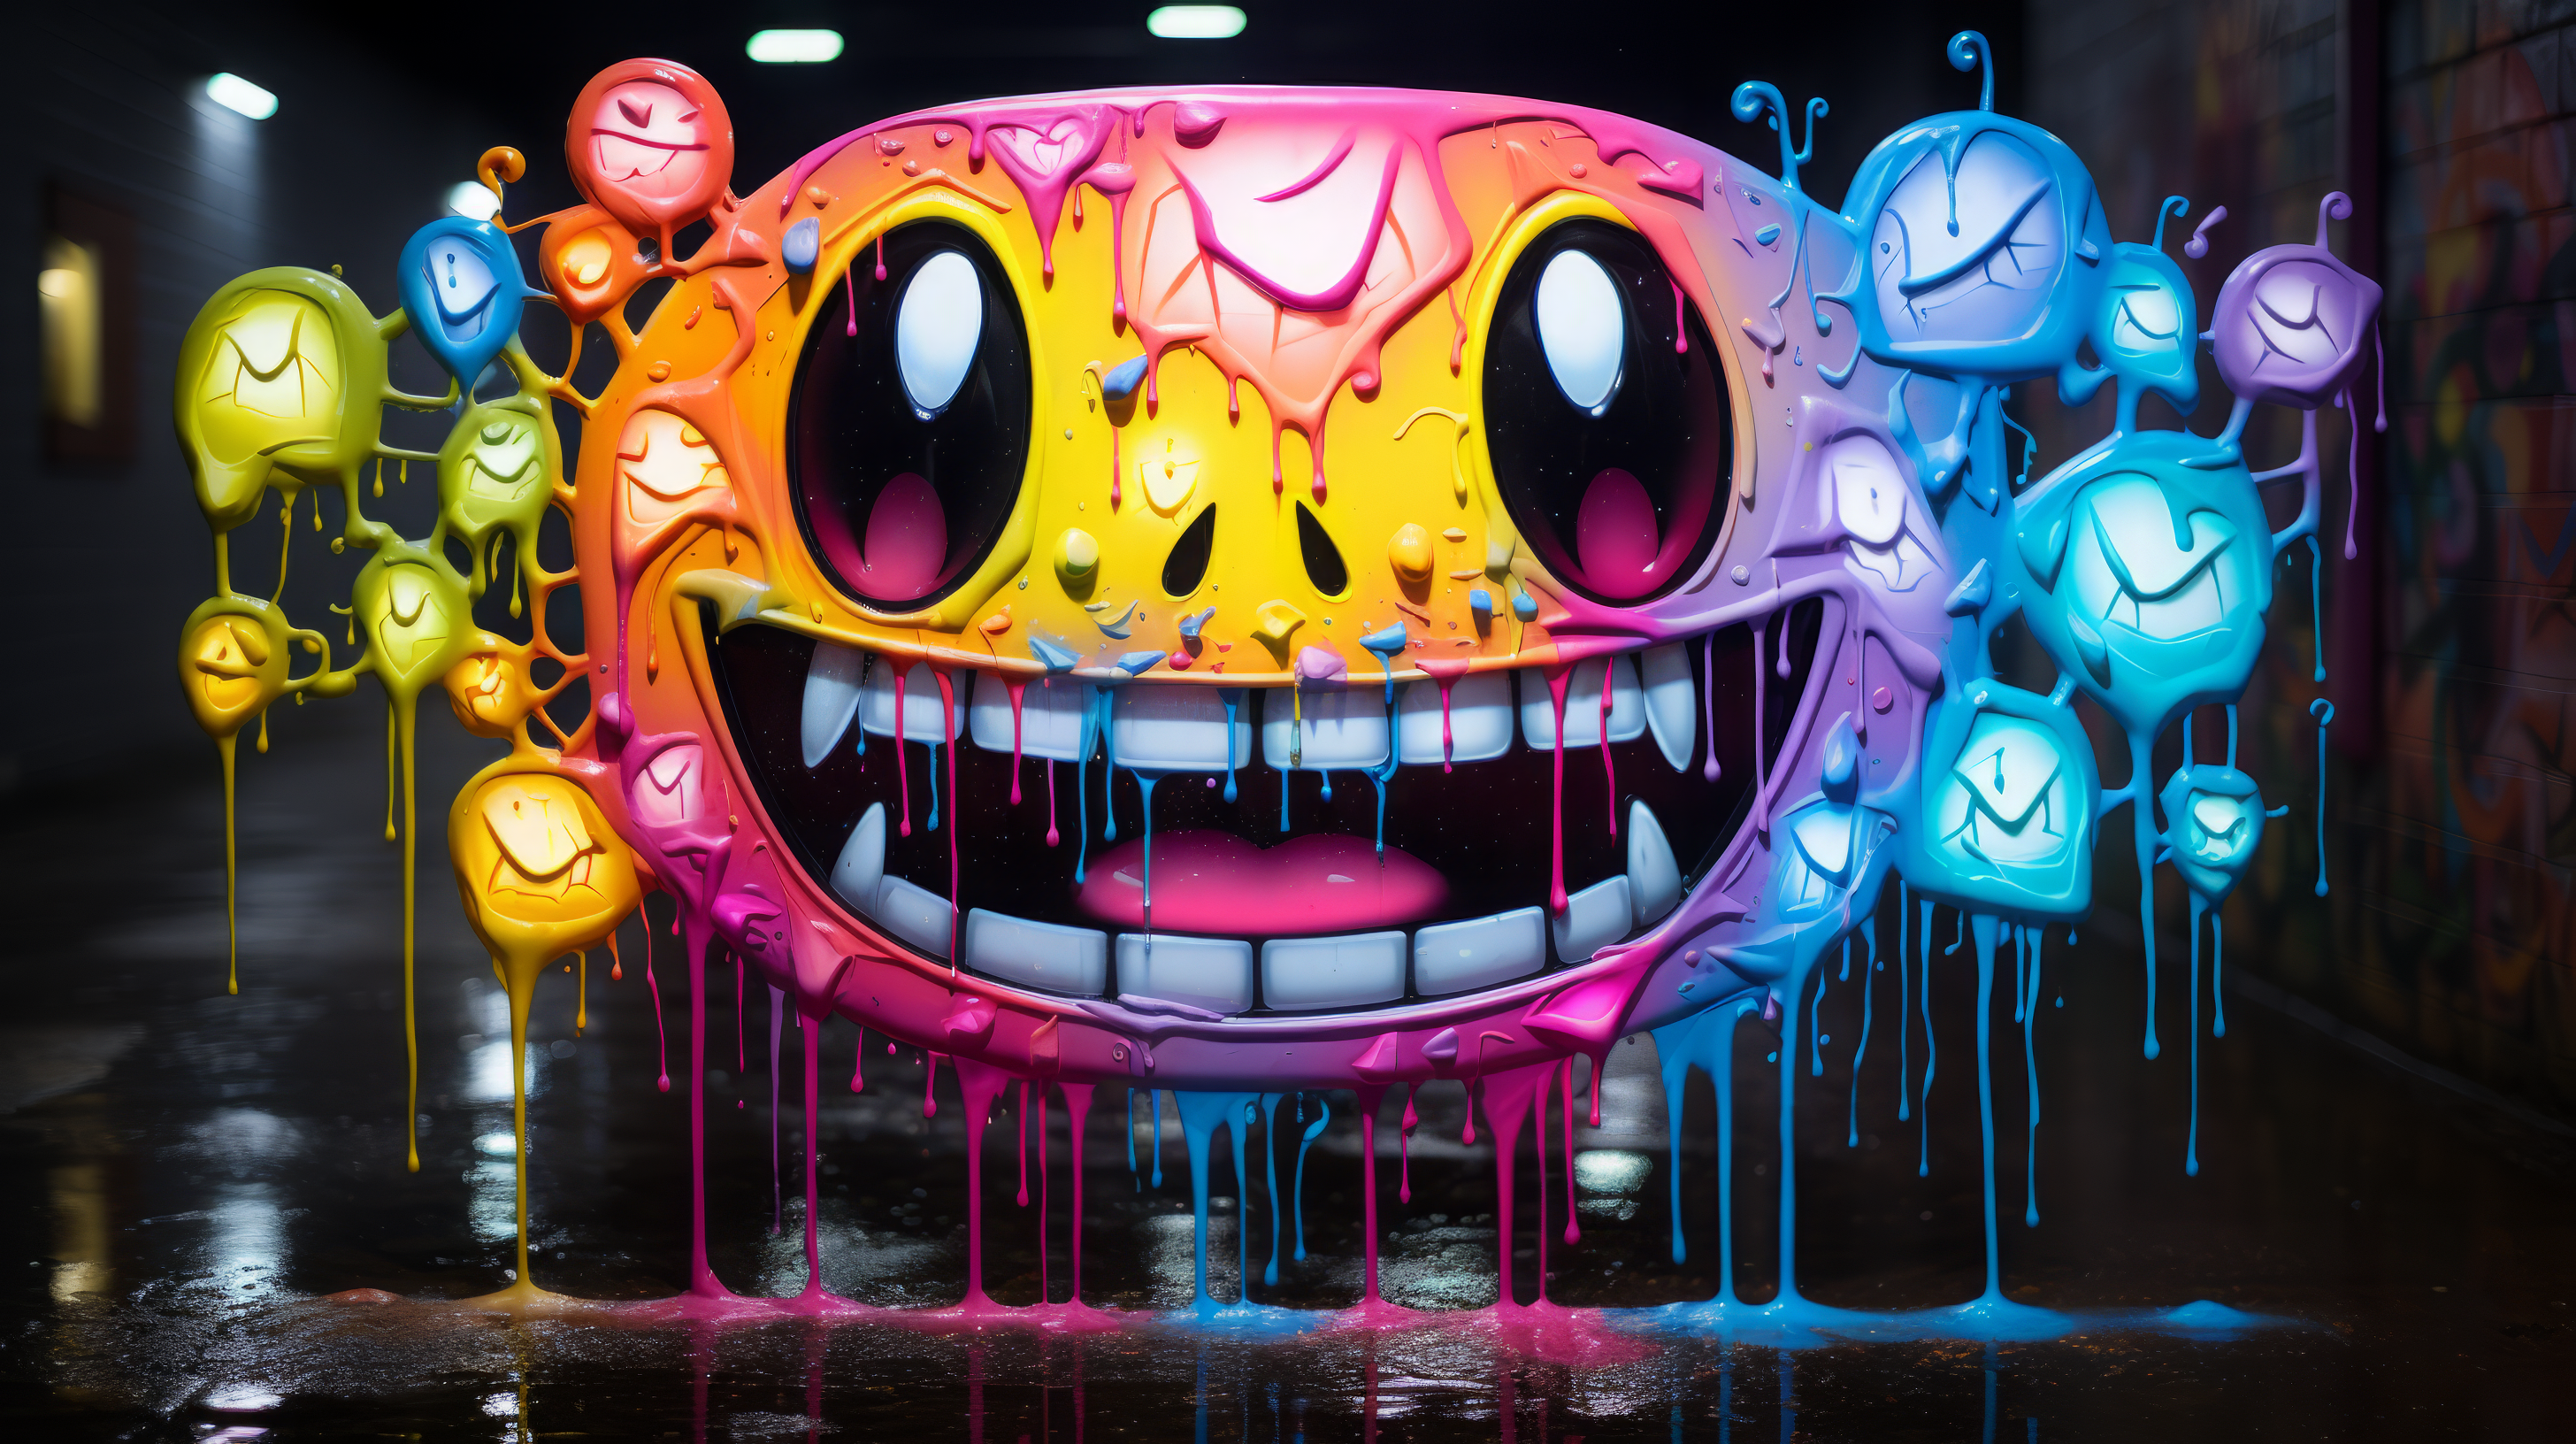 HD desktop wallpaper featuring colorful, graffiti-style emoji artwork with dripping paint, perfect for an AI Art-inspired background.